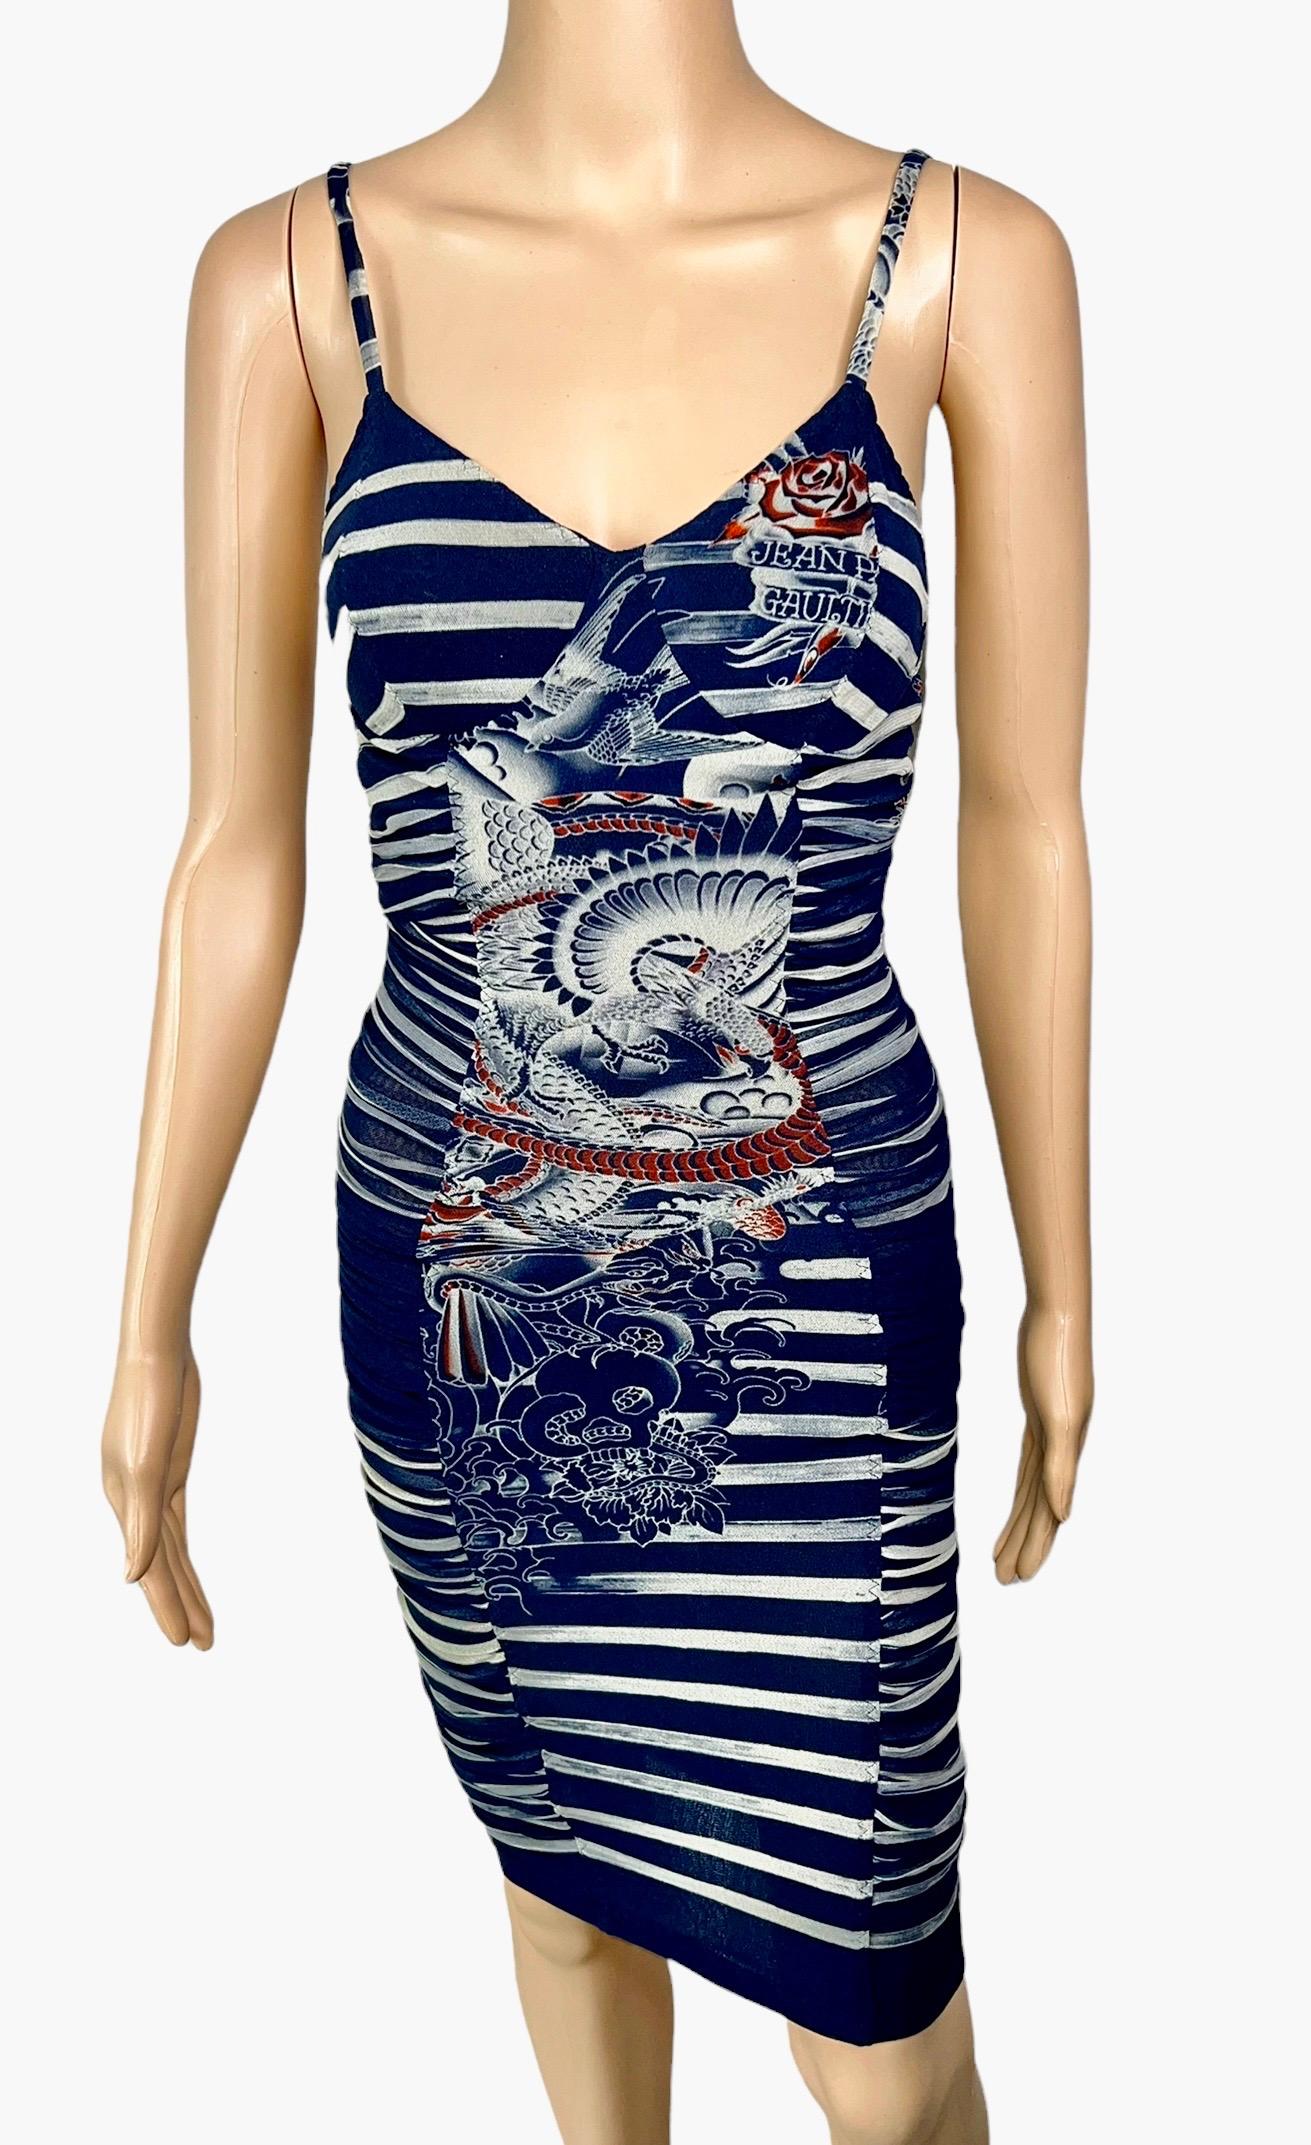 Jean Paul Gaultier Soleil Tattoo Print Semi-Sheer Mesh Ruched Bodycon Dress Size S